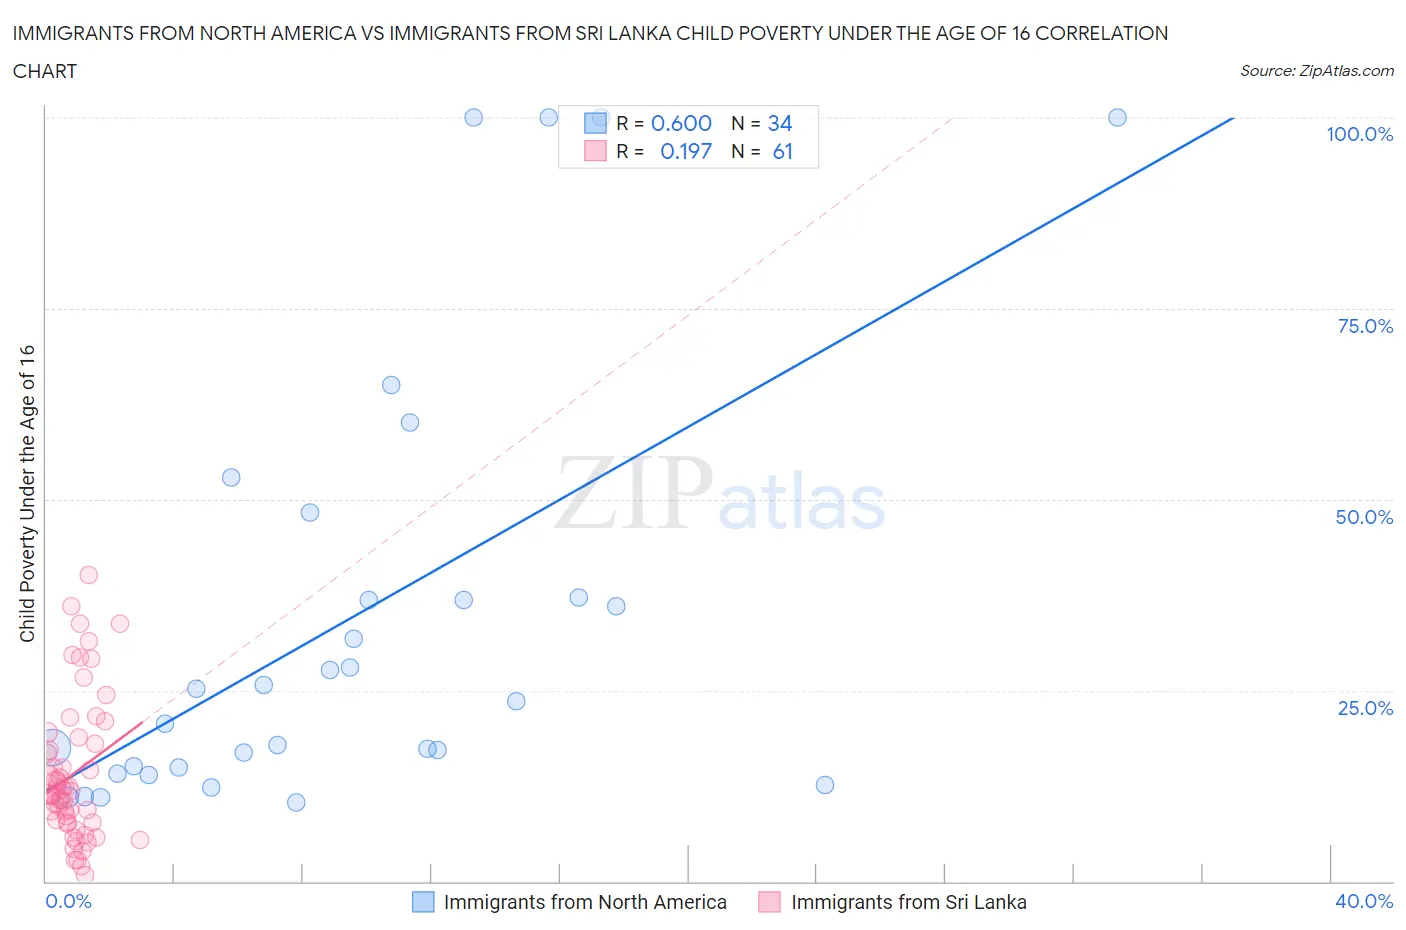 Immigrants from North America vs Immigrants from Sri Lanka Child Poverty Under the Age of 16